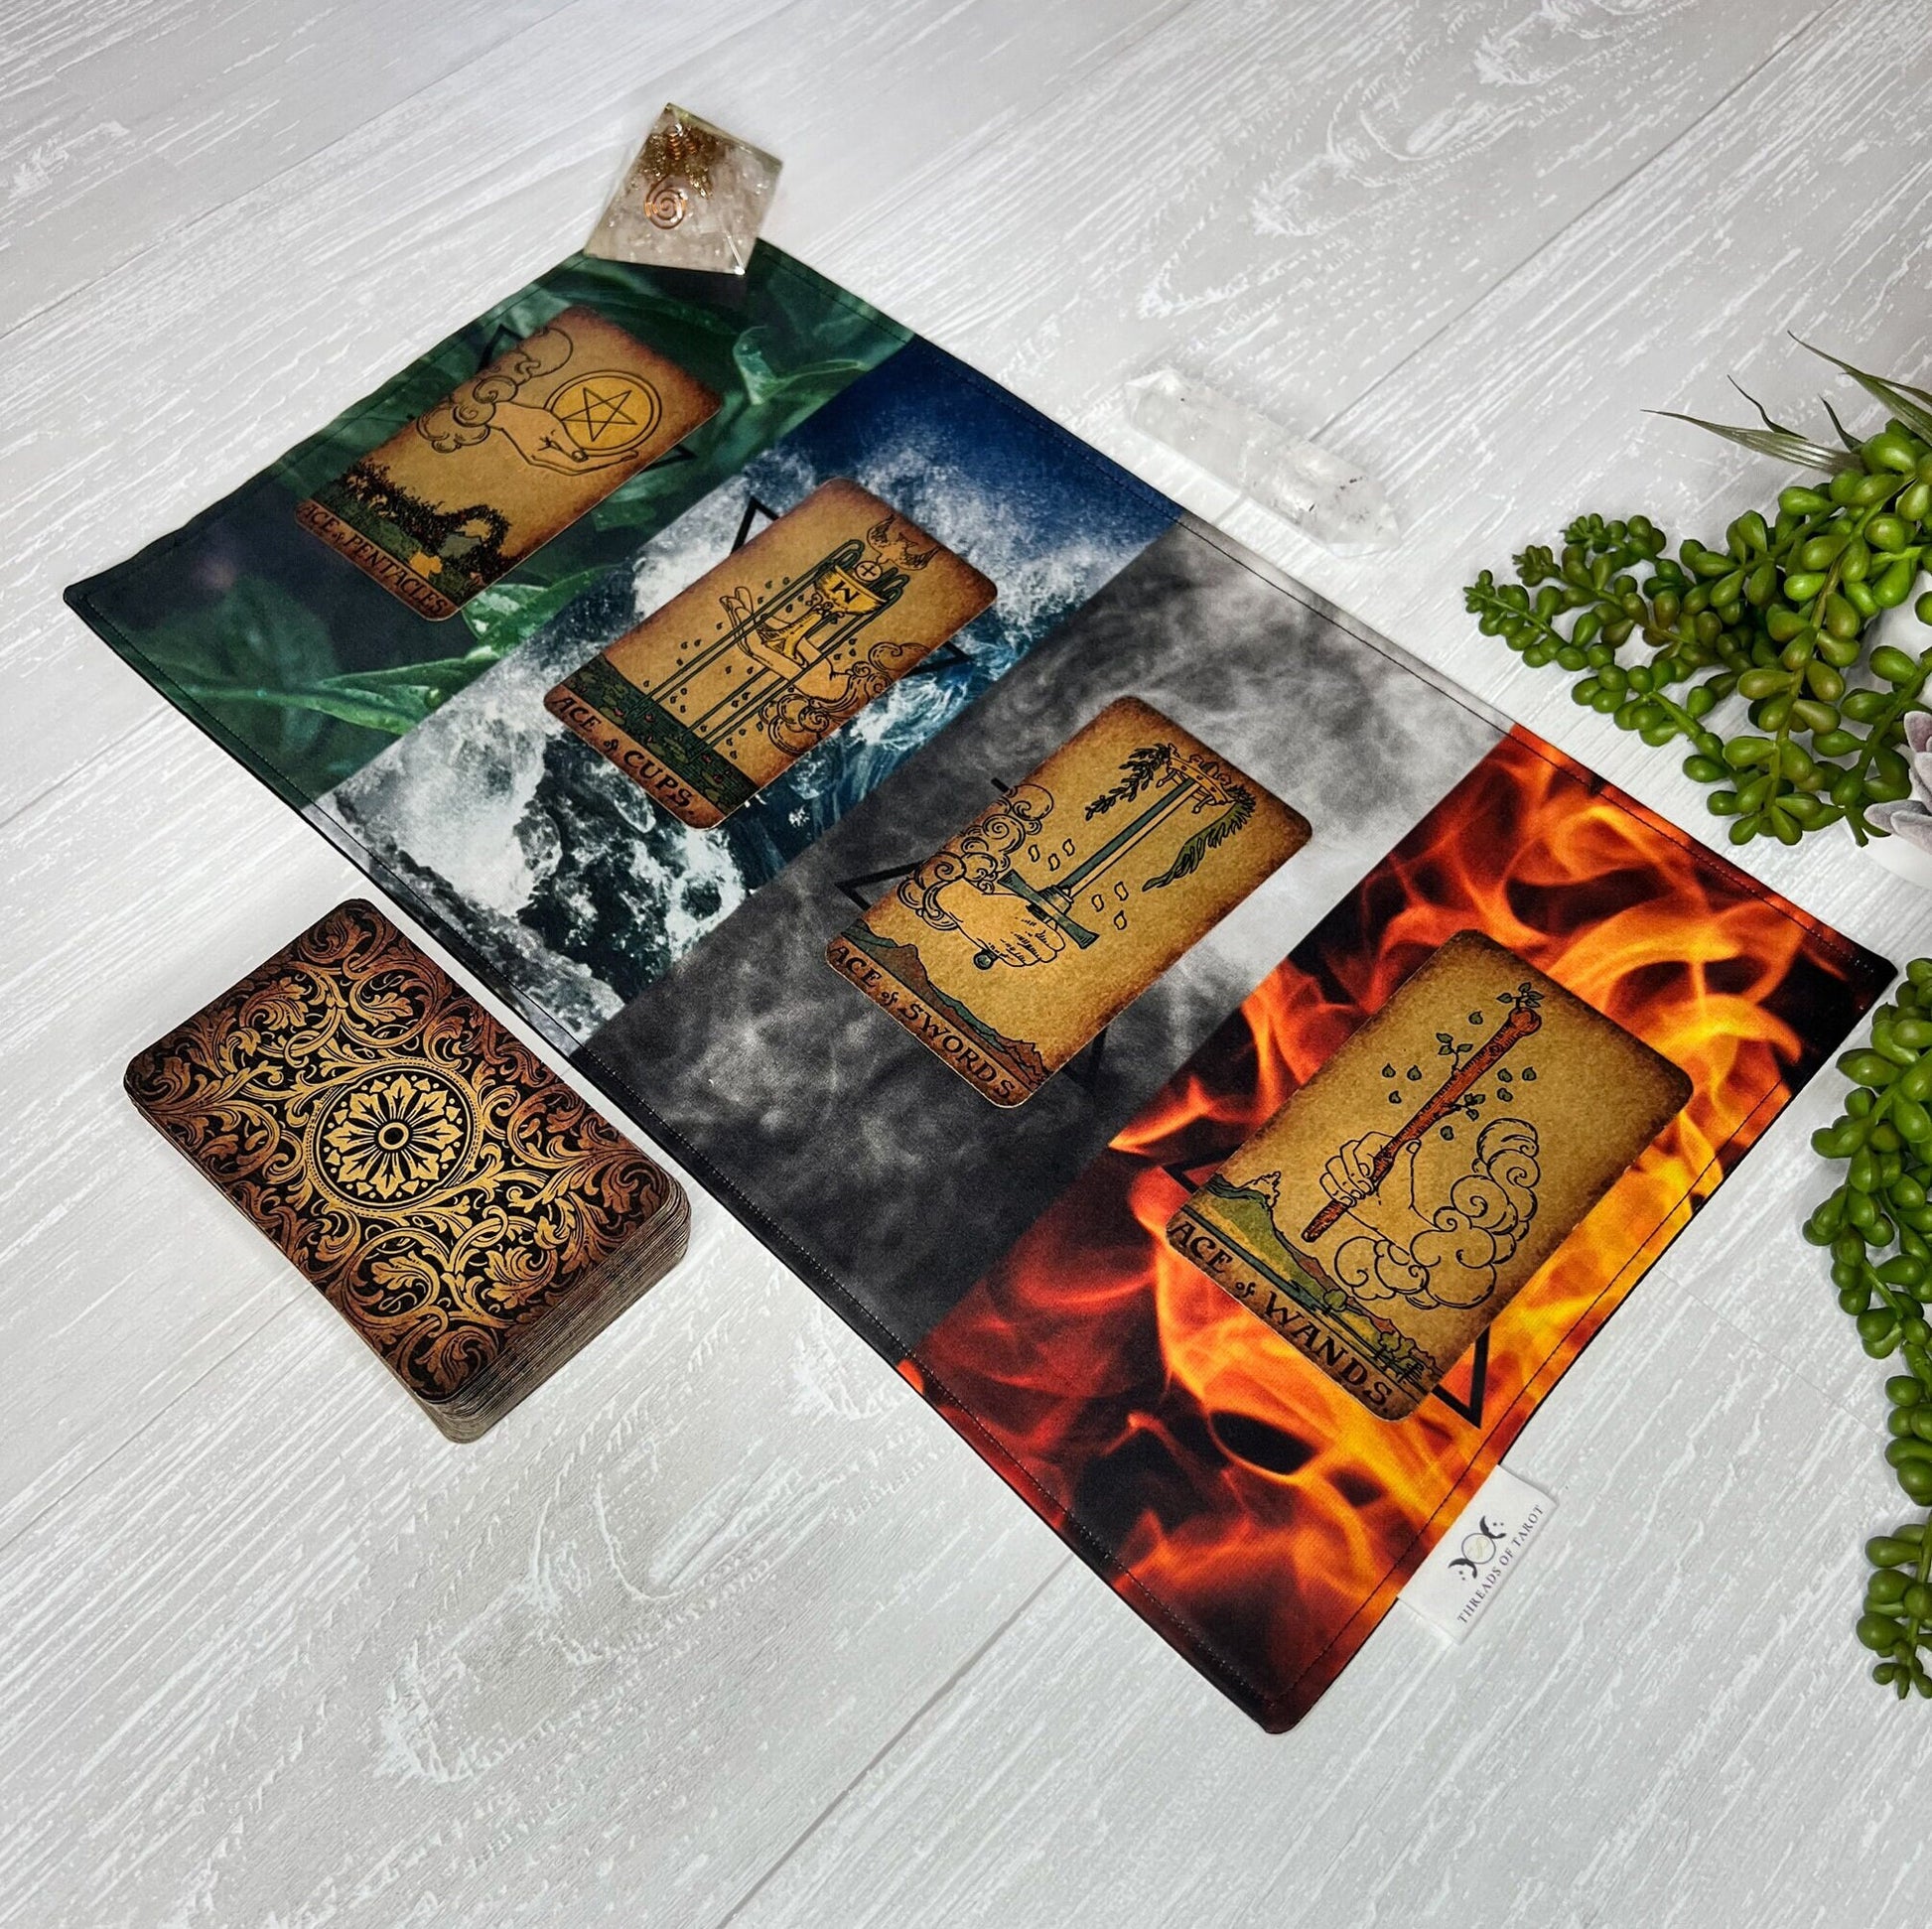 Alchemy Tarot Cloth, Rune Casting Cloth, Altar Ritual Cloth, Tarot Reading Supplies, Pagan Witchcraft Wiccan Gift Supplies, Elements